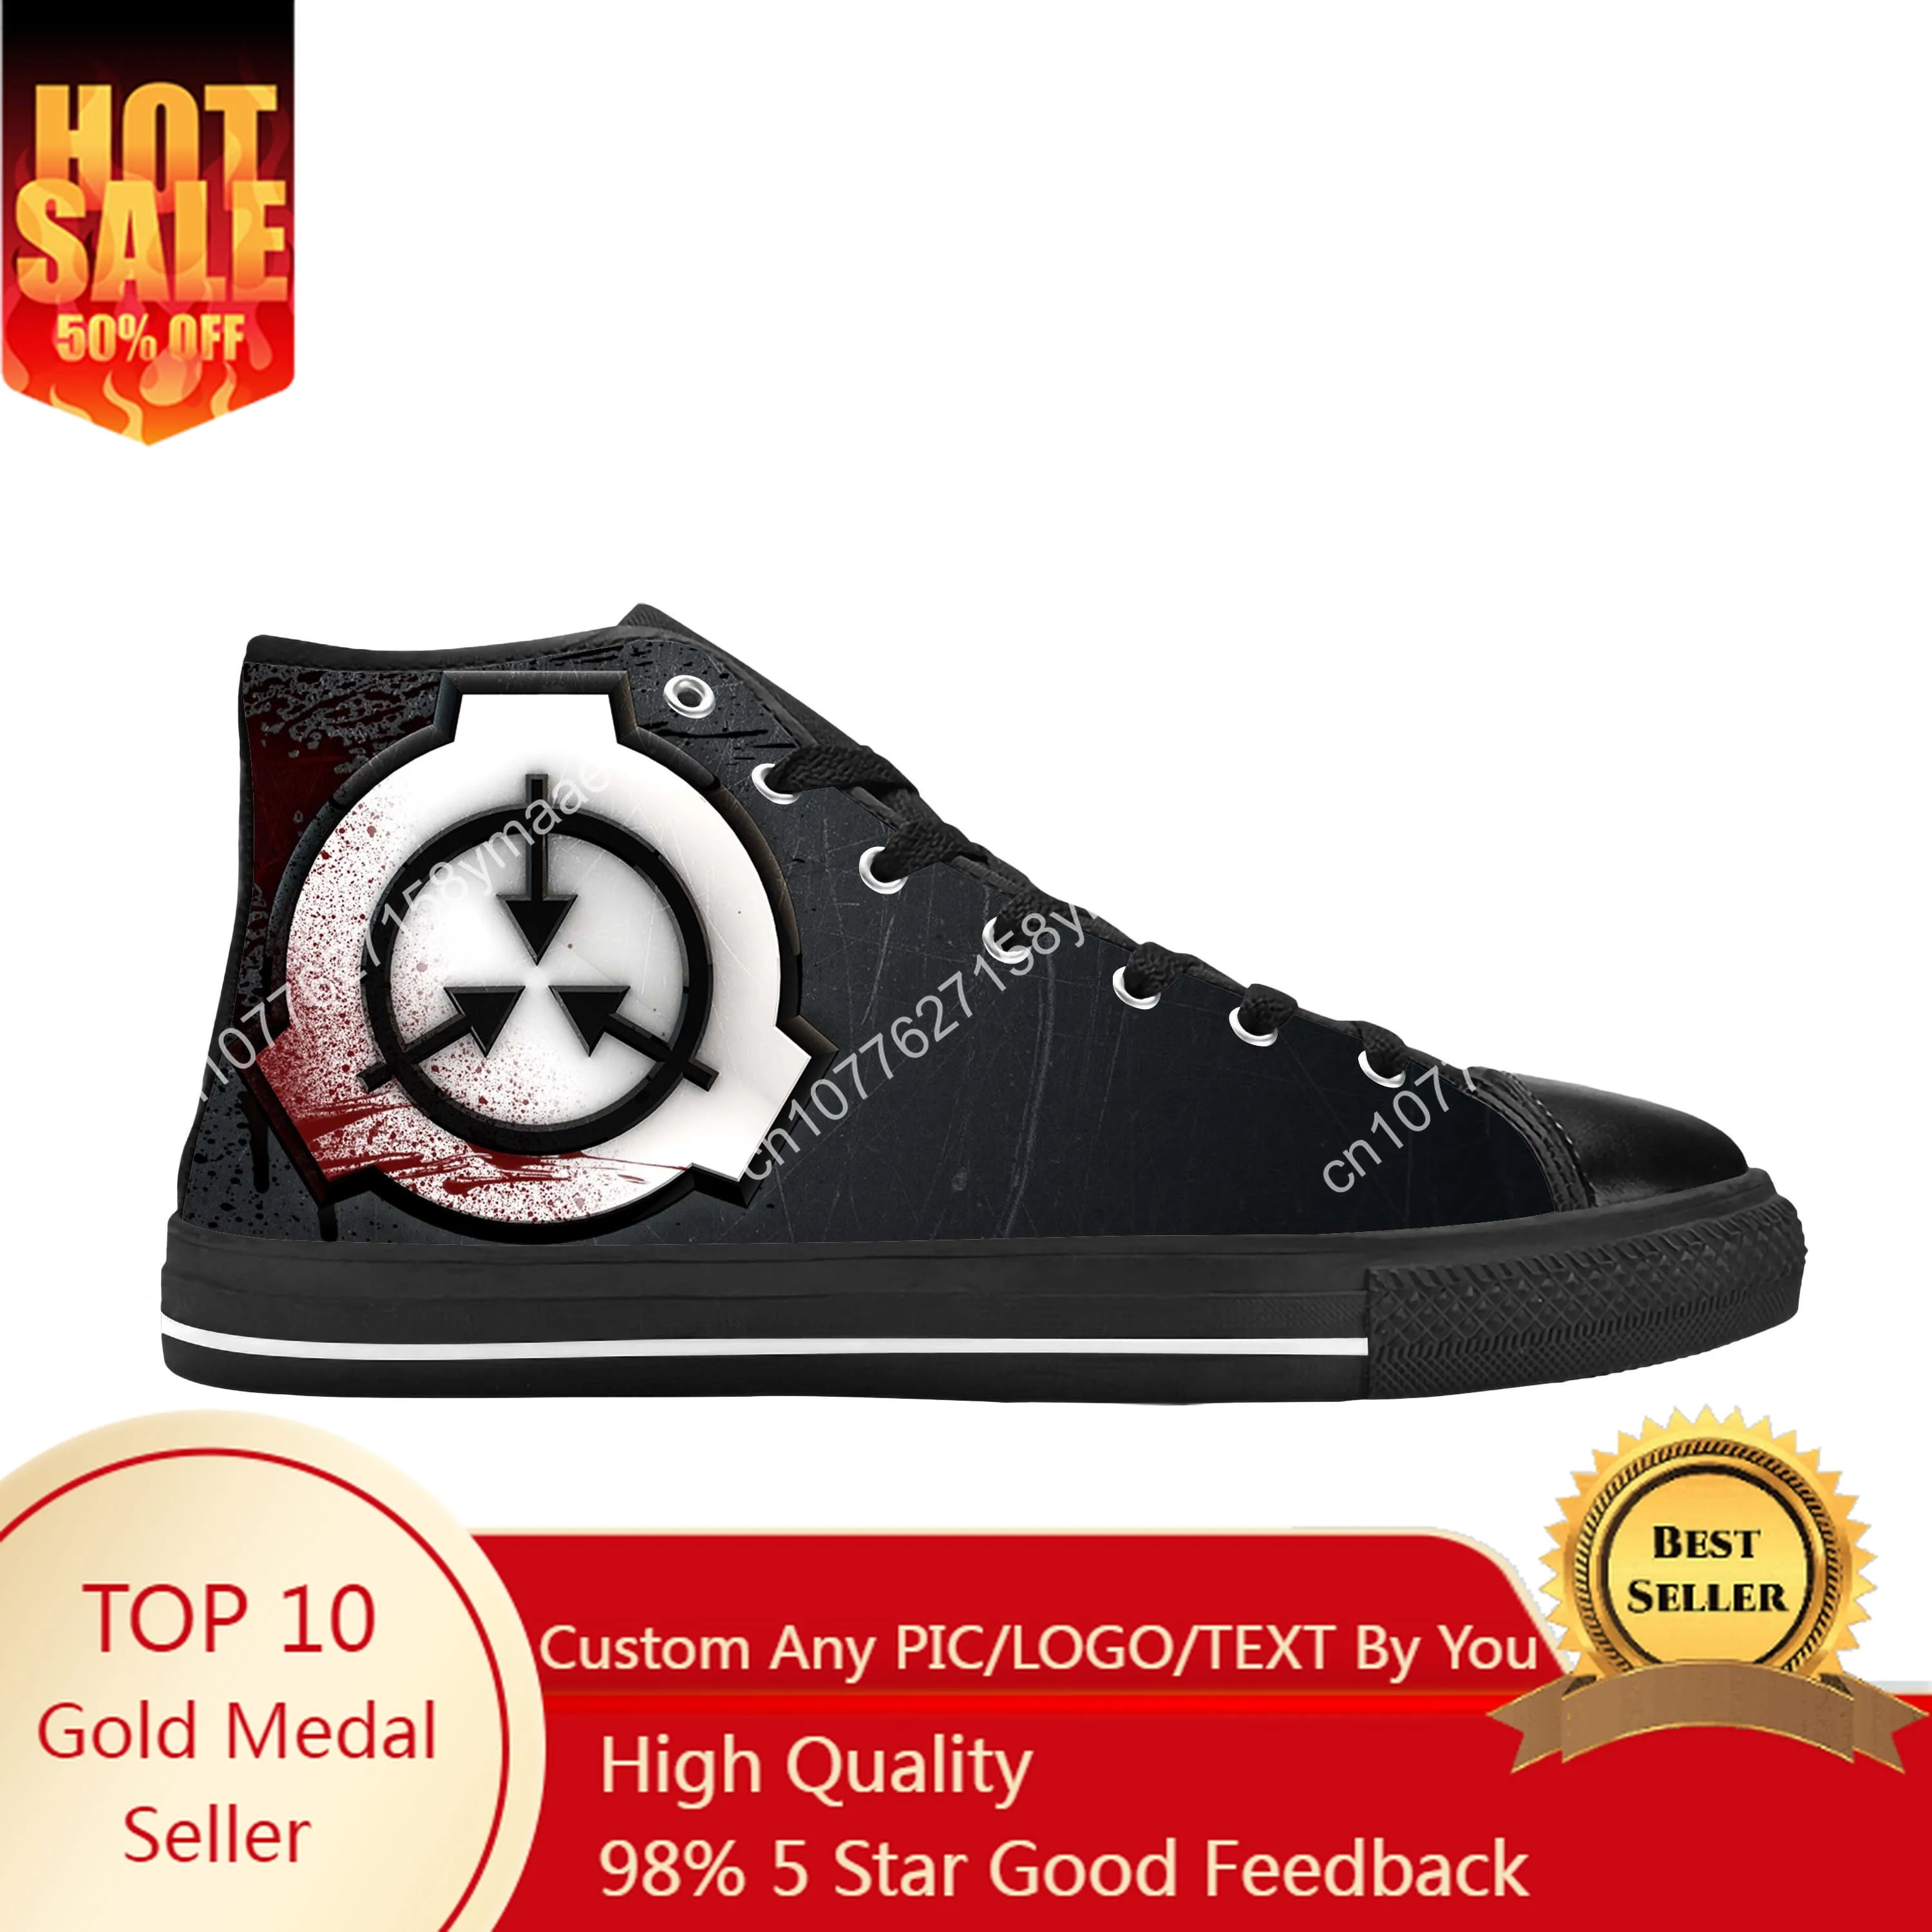 Hot SCP Foundation Secure Contain Protect Fashion Casual Cloth Shoes High Top Comfortable Breathable 3D Print Men Women Sneakers luxurious mens casual shoes hot sale high quality men sneakers fashion light breathable comfortable ventilation